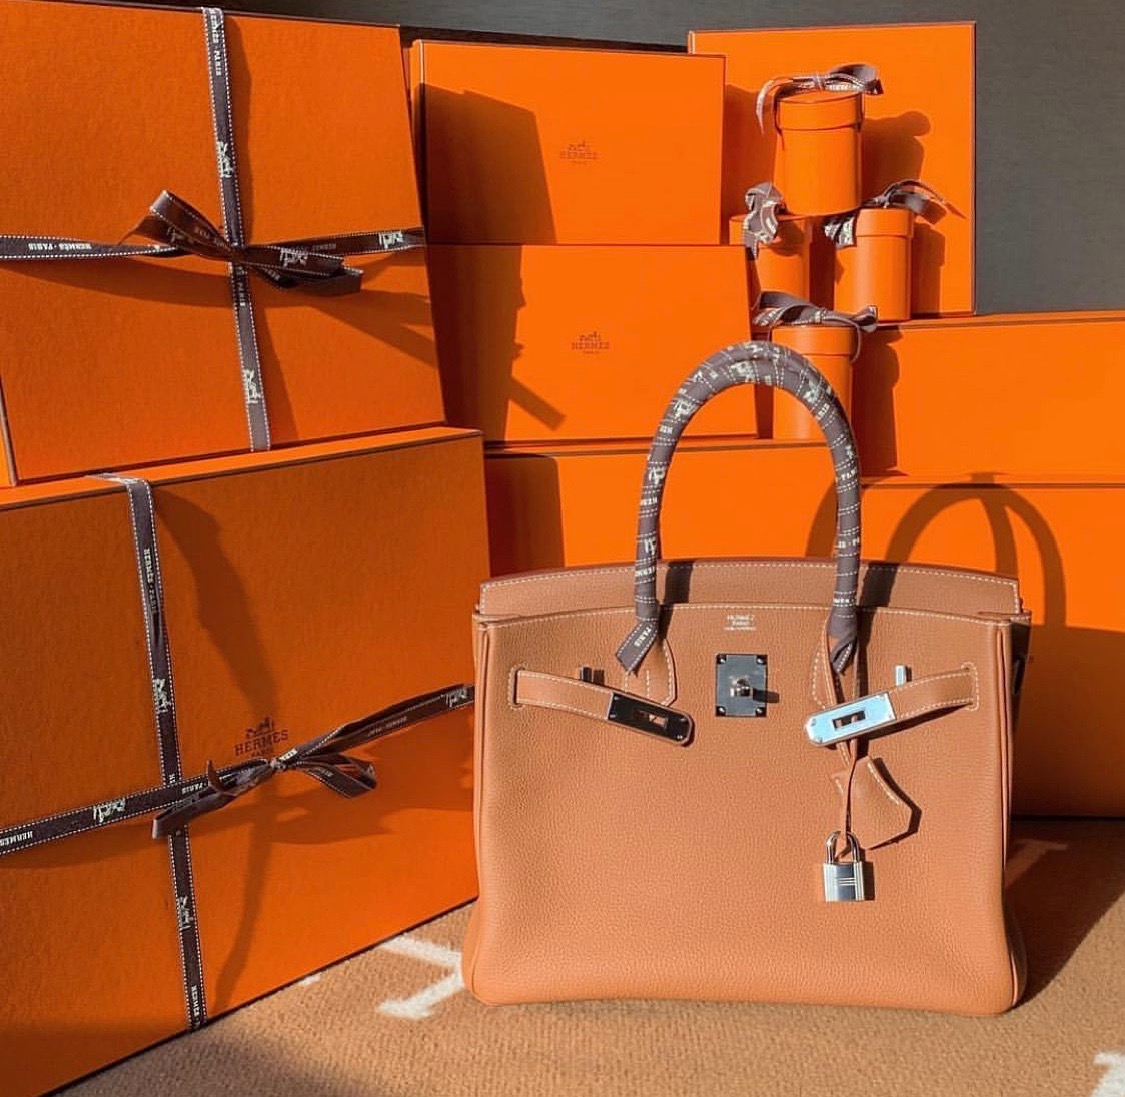 What should one consider when buying their first Hermès Birkin bag? - Quora